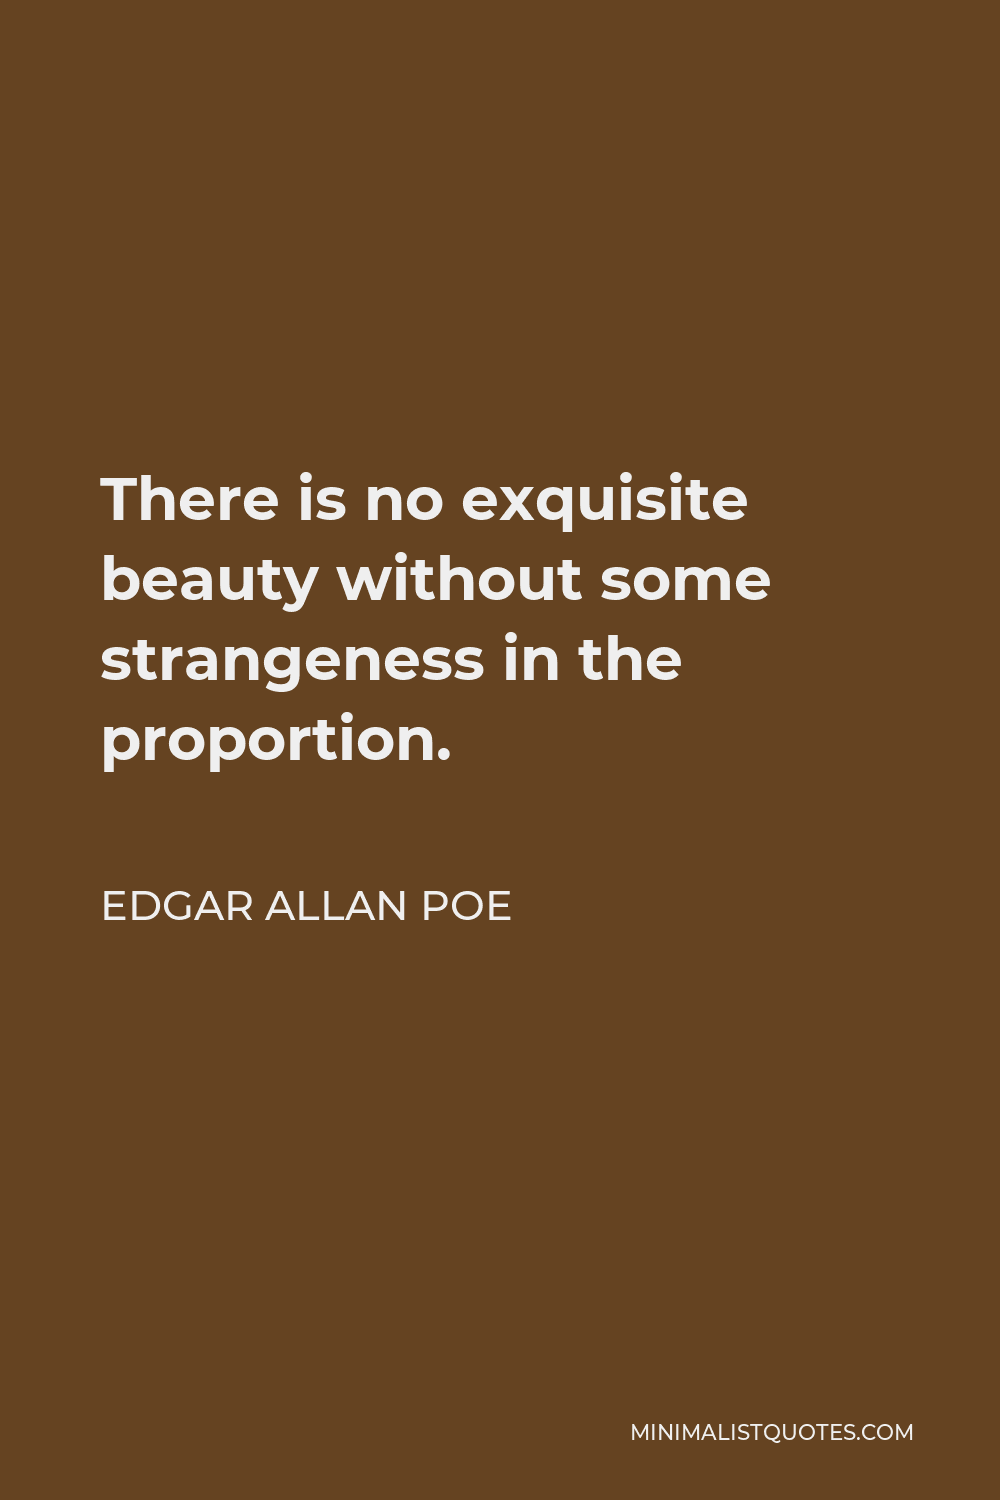 Francis Bacon Quote: There is no exquisite beauty, without some ...